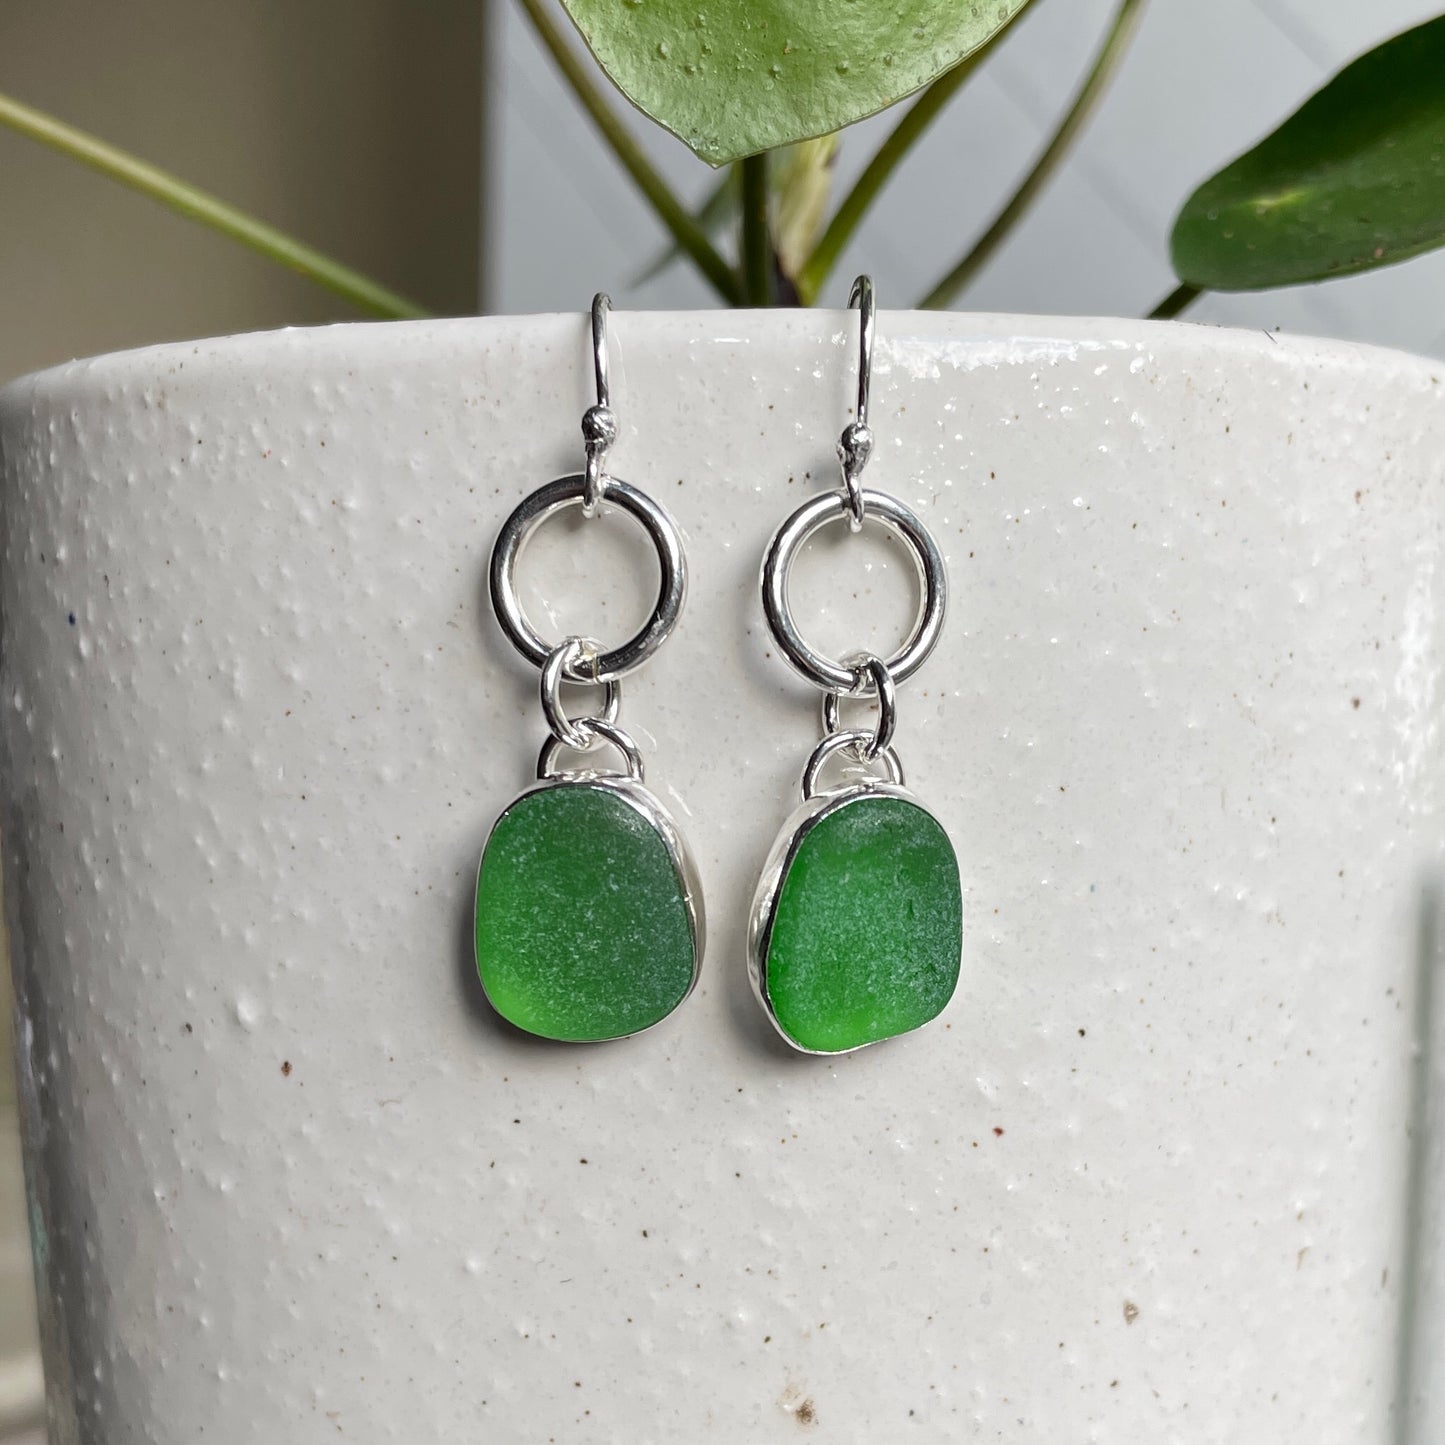 This is a pair of dangly bright green sea glass earrings with approximately 1/2" sea glass set in fine and sterling silver bezel settings and attached to a ring & ear wires. Accent Yourself specializes in sterling silver jewelry handmade by Barb Macy and Will Macy in Corvallis, OR including sea glass jewelry, Oregon sunstones, sterling silver earrings, and jewelry made with gemstones found in the Pacific Northwest.